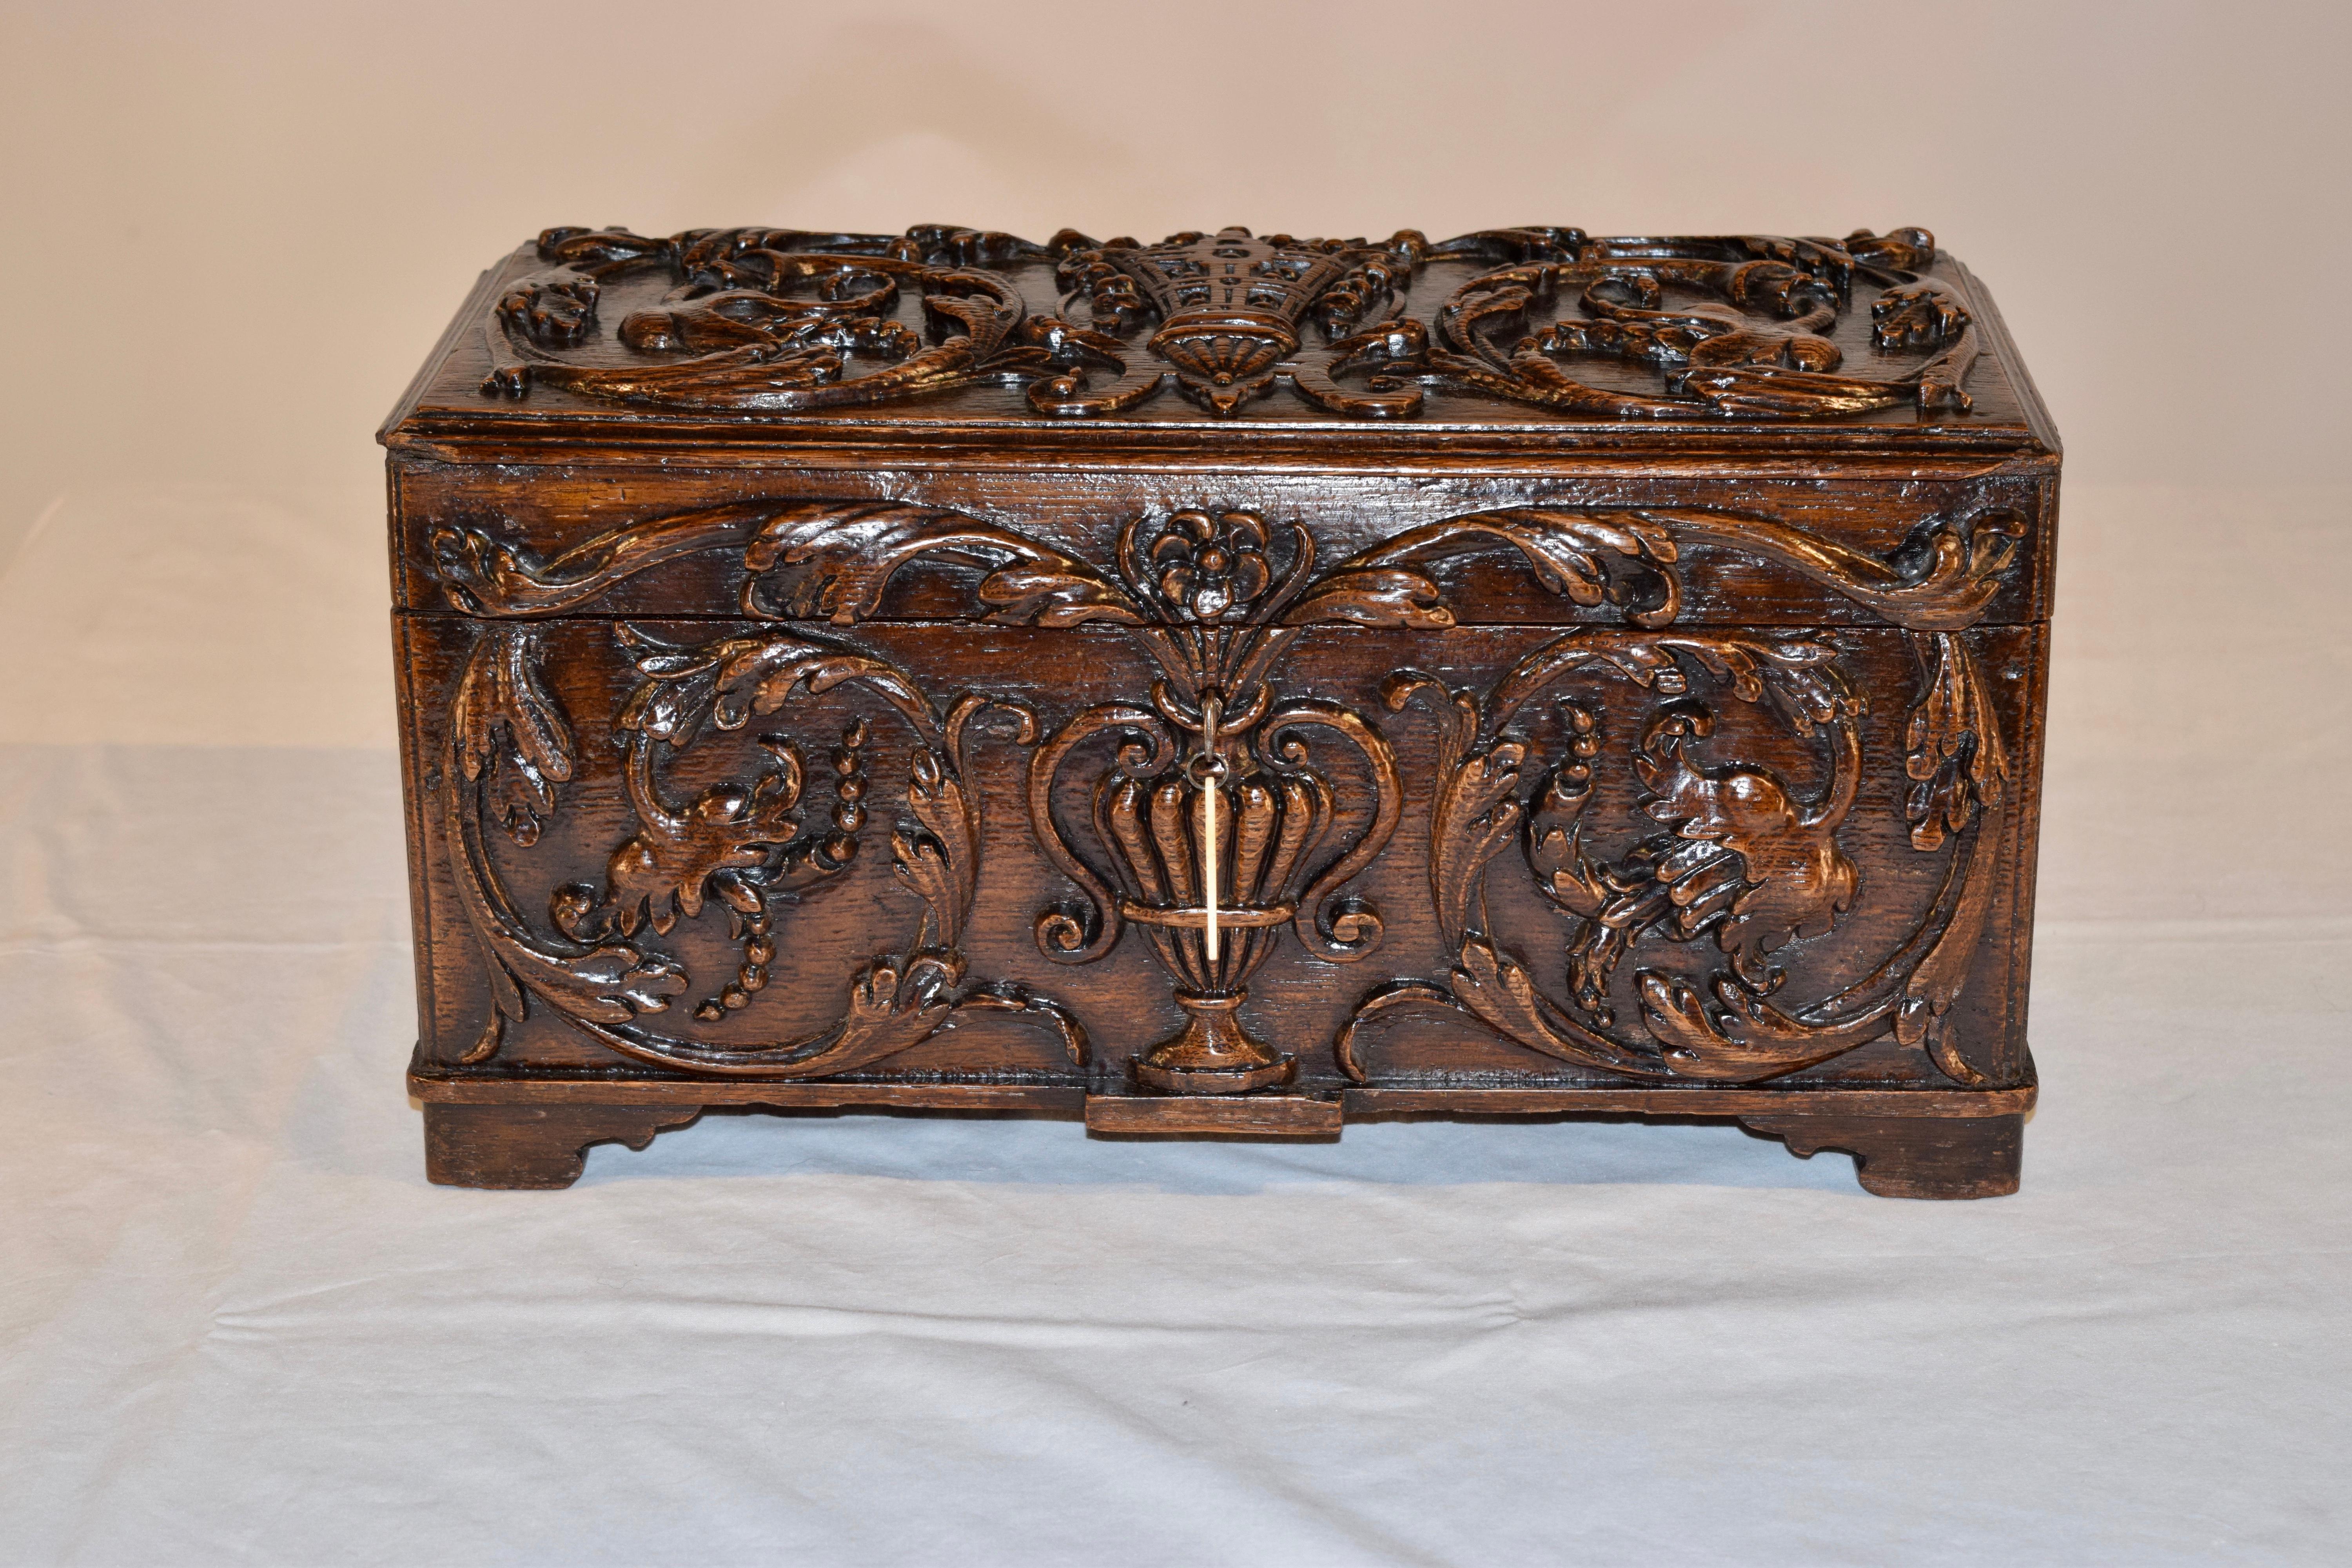 18th century oak tea caddy from England. The top and front of the tea caddy are hand carved decorated with vases, florals and vines. The sides are hand carved decorated with patterns and the back of the box is hand carved decorated with florals and